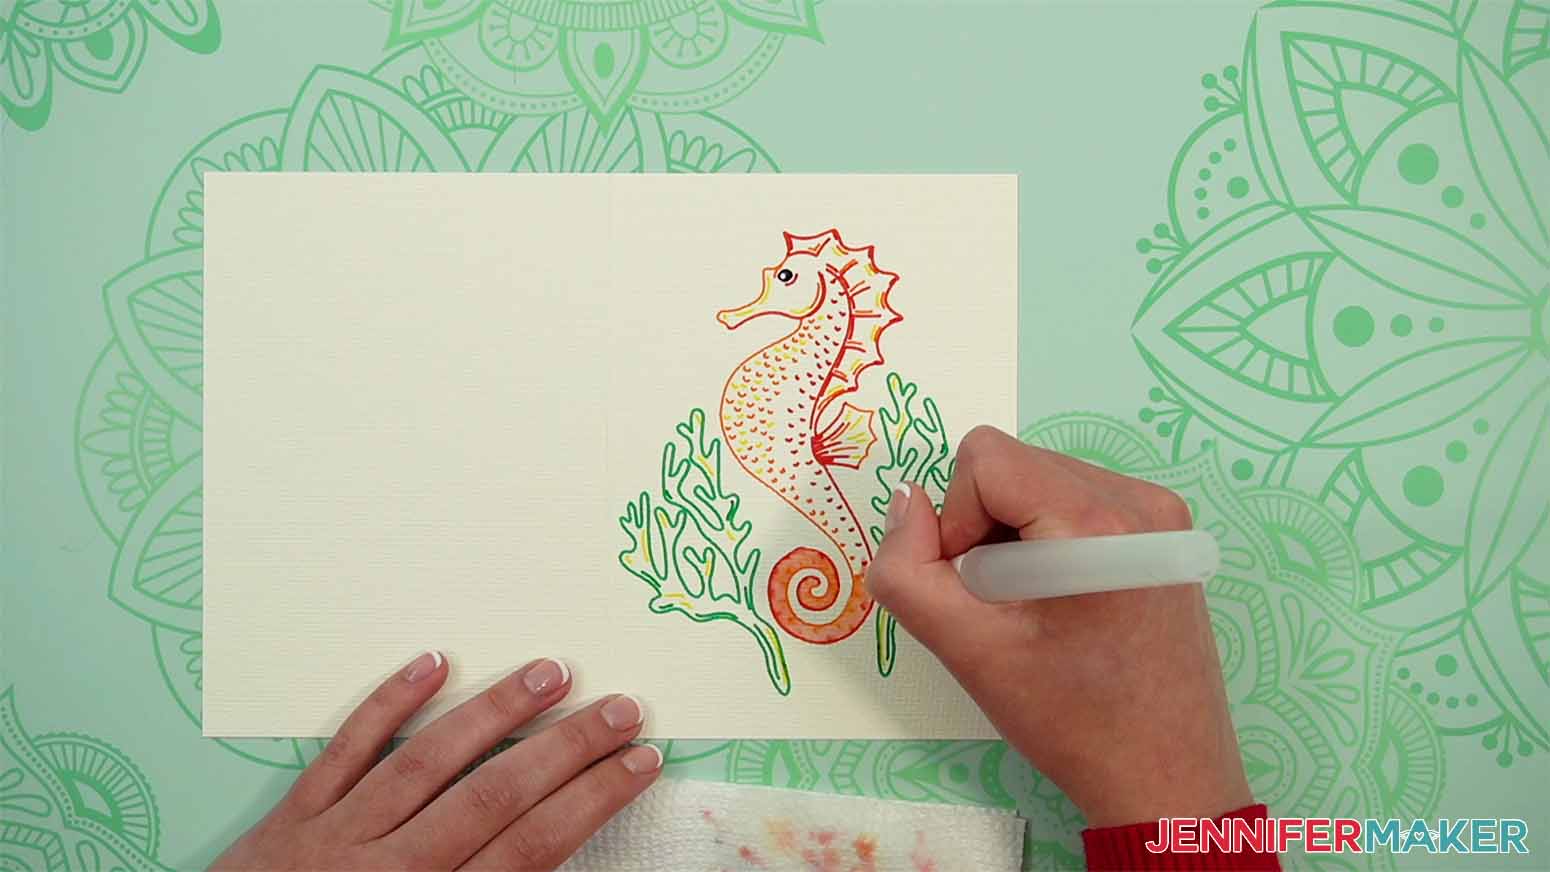 starting at the end of the tail paint the body of the seahorse